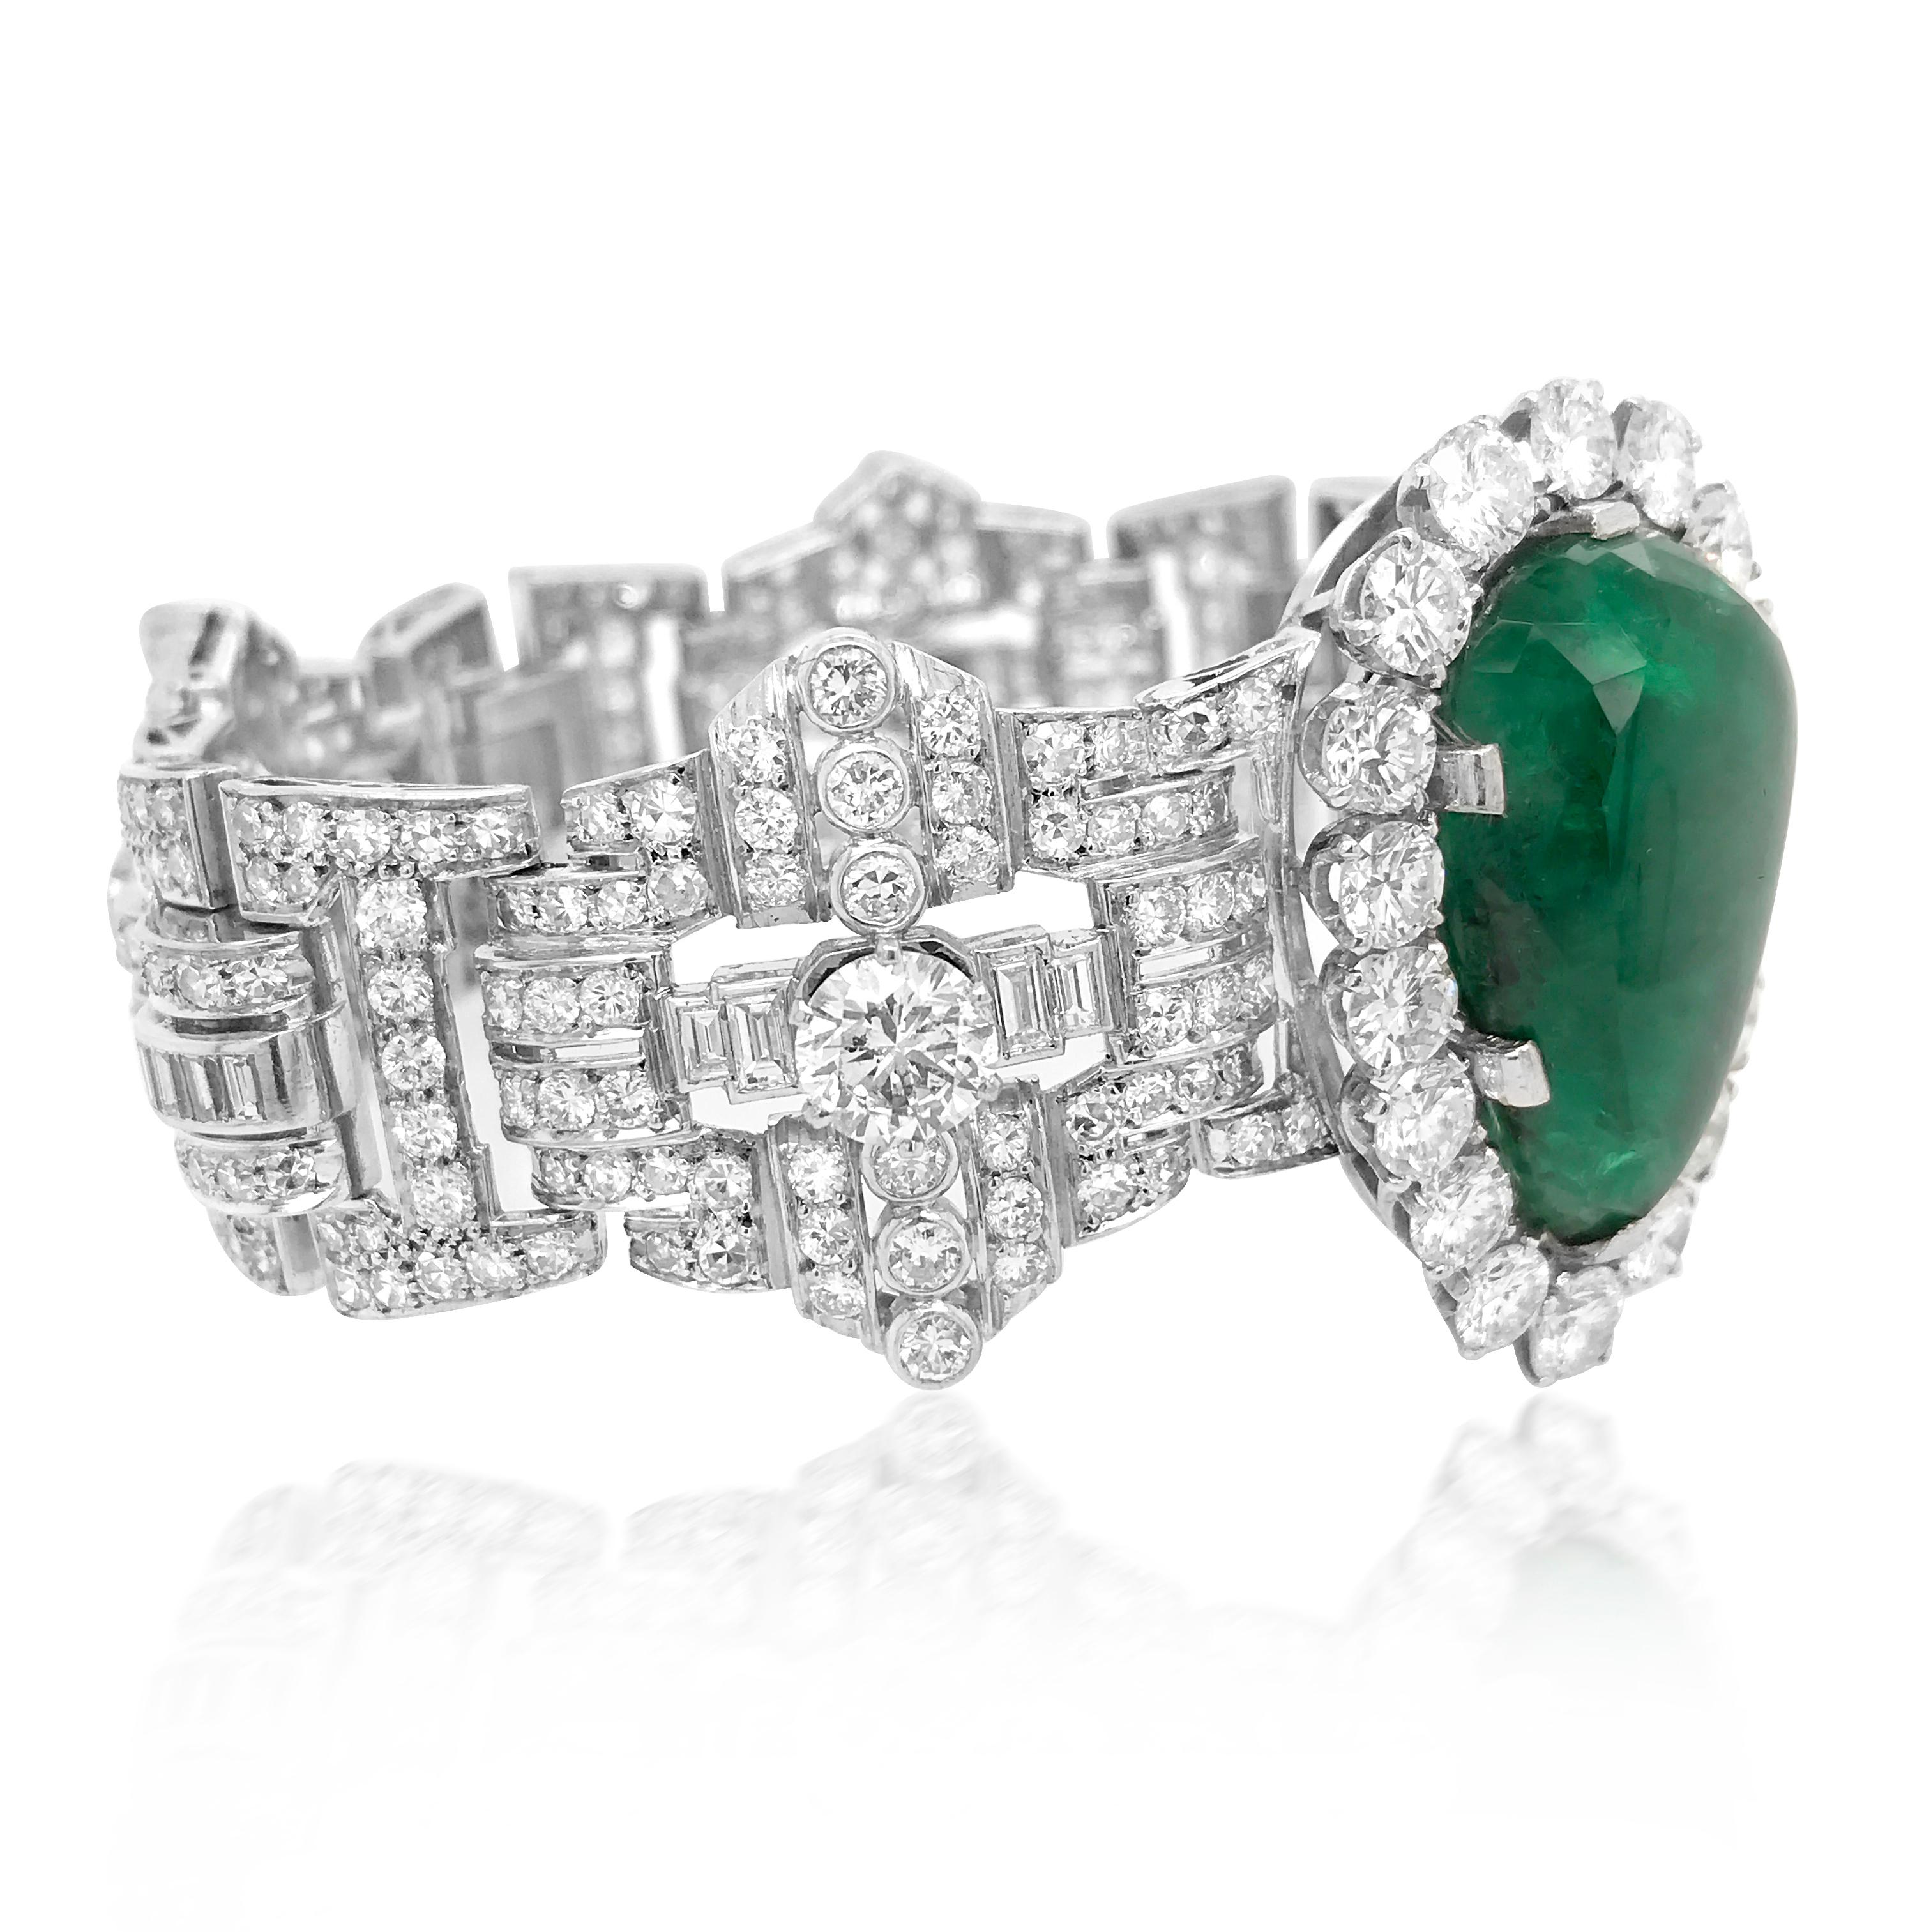 This opulent, quintessentially Retro design bracelet is rendered in solid 18K, weighing 84.77 grams and measuring approx. 19.2 cm (7.55 inches) long and 38mm (1.5 inches) wide. The impressive bracelet is centered with a pear shape cabochon emerald,